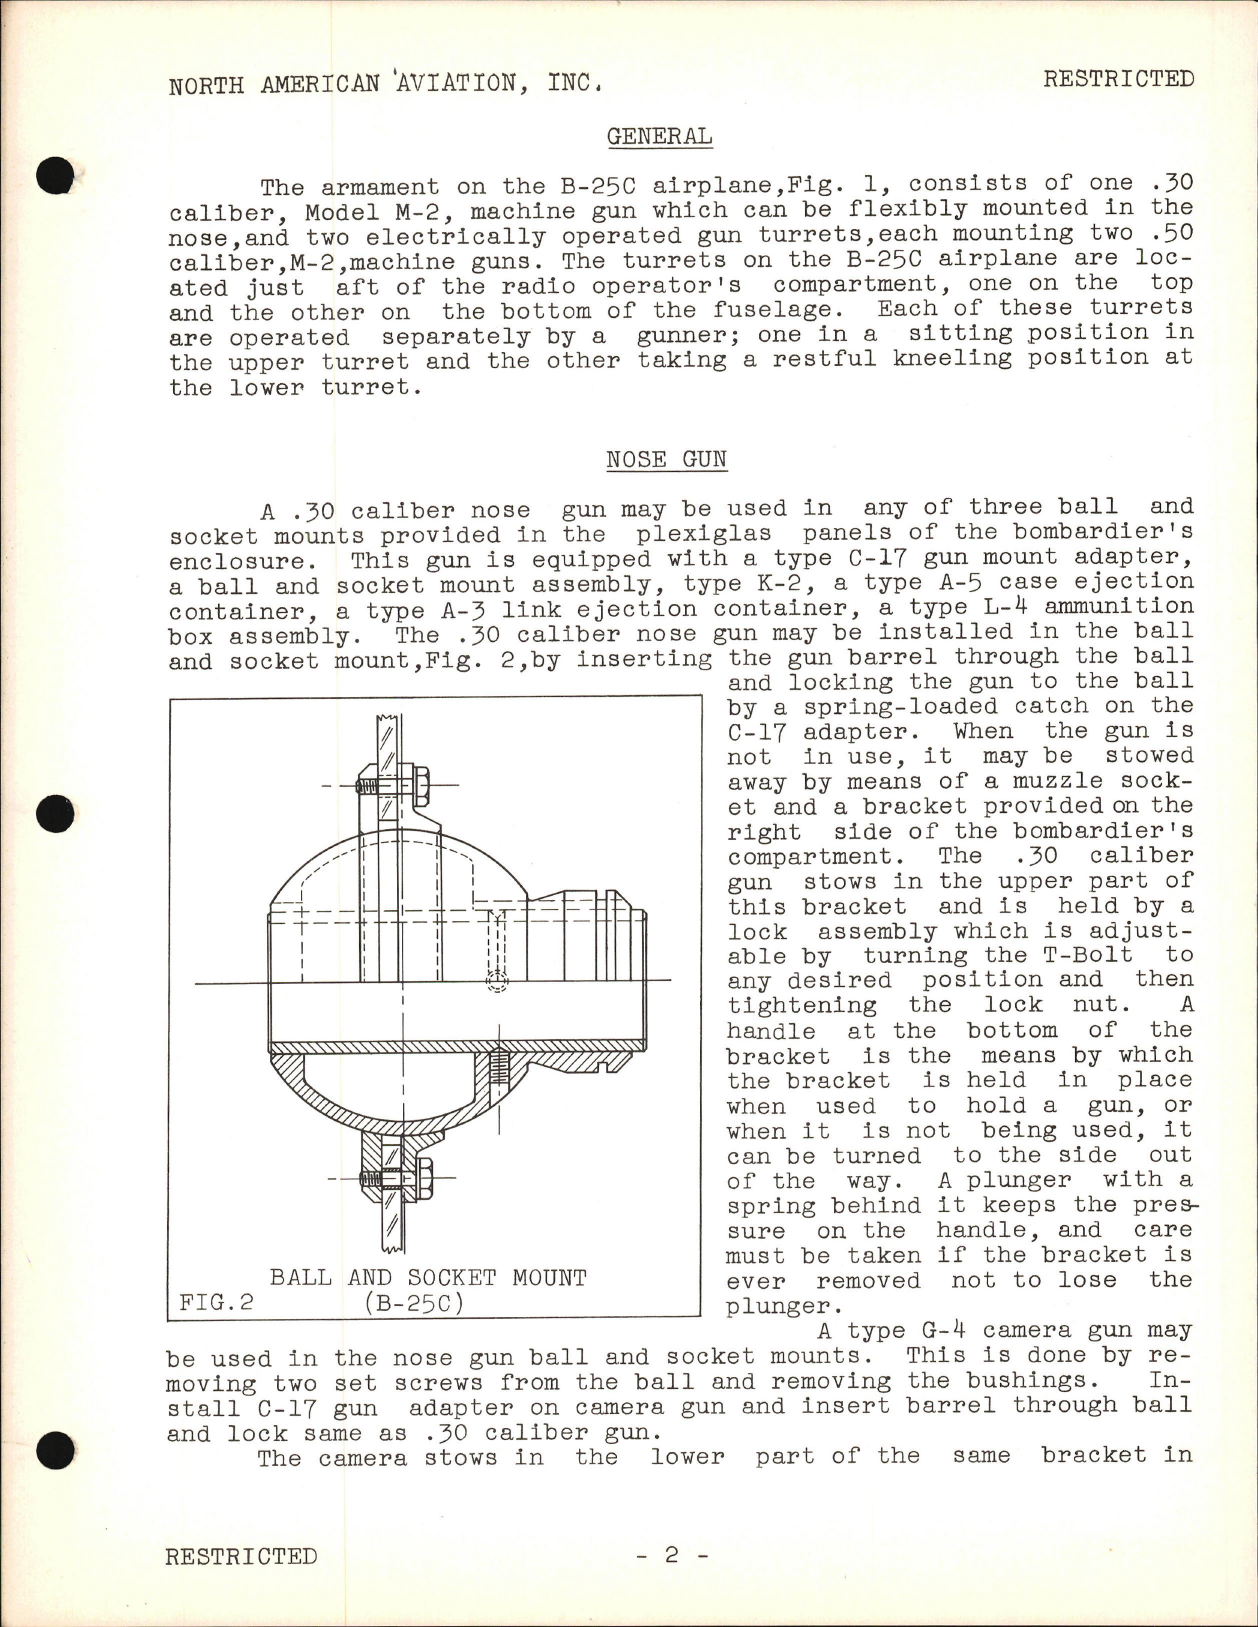 Sample page 7 from AirCorps Library document: Service School Lectures - Gun Install